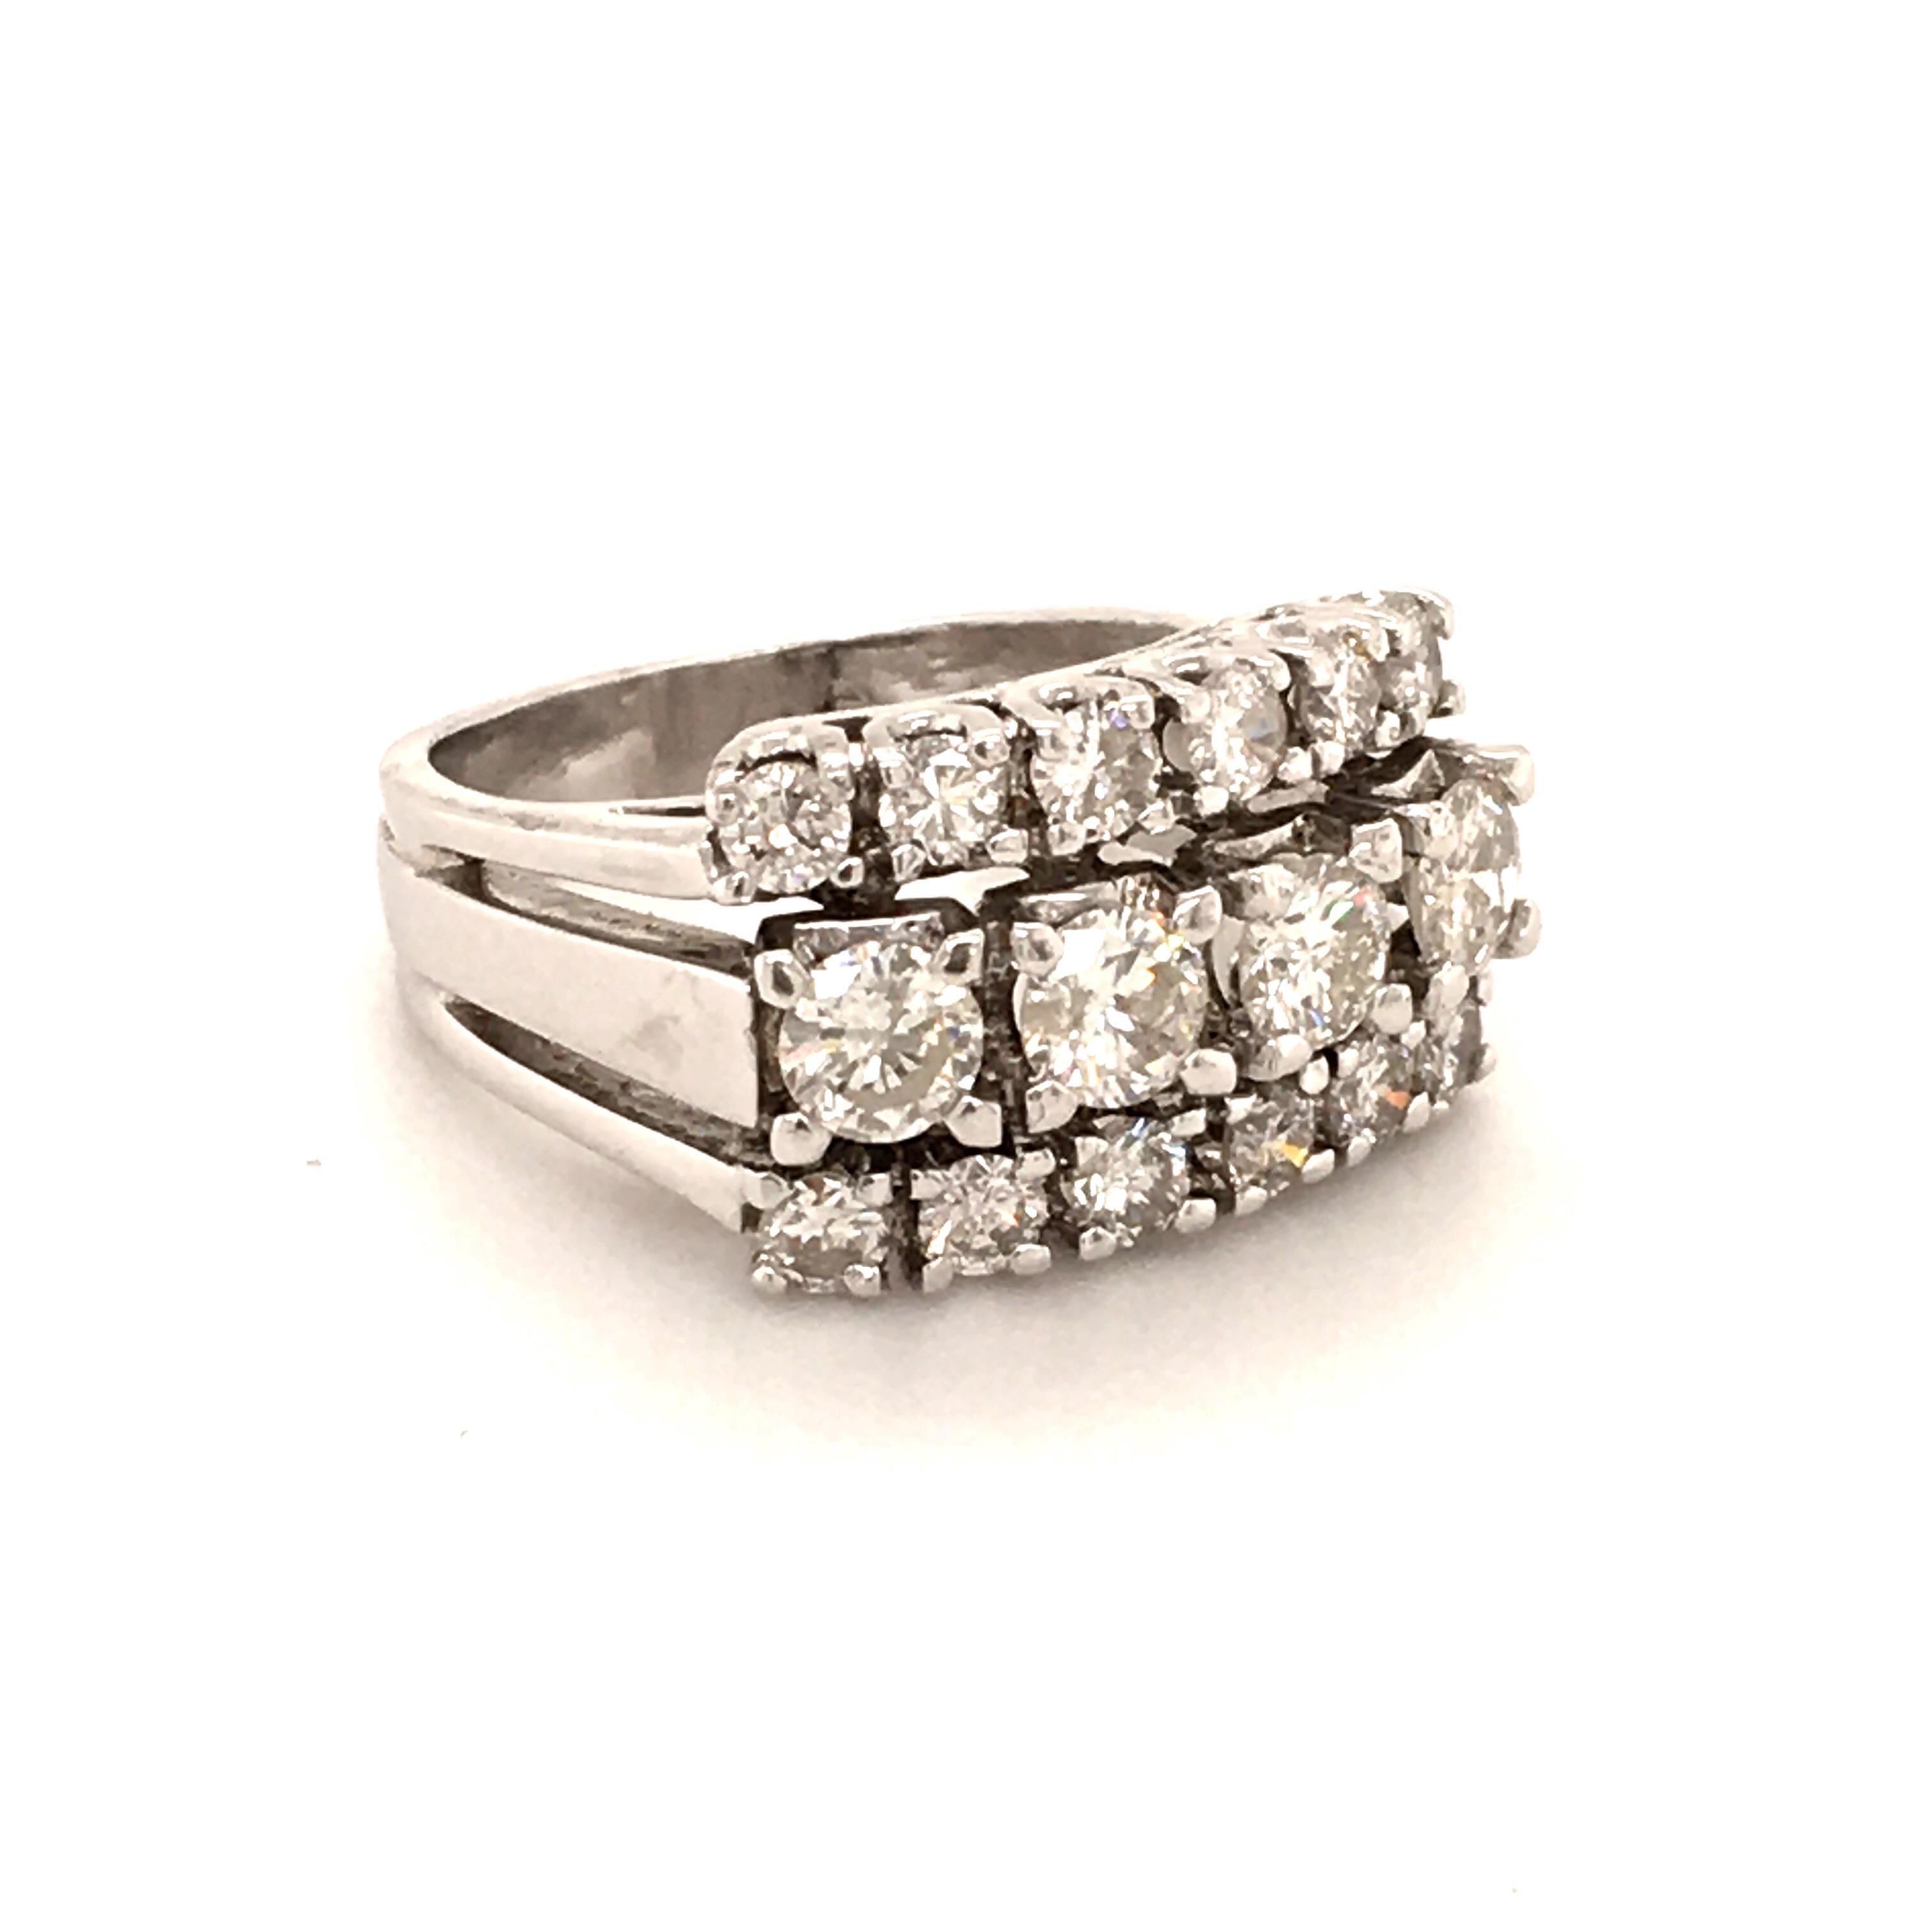 This diamond ring in white gold 14K is designed as three parallel lines set with round brilliant-cut diamonds. 
The middle row consists of four stones totalling approximate 0.88 ct, the two outer lines consist of 12 stones totalling approximate 0.60